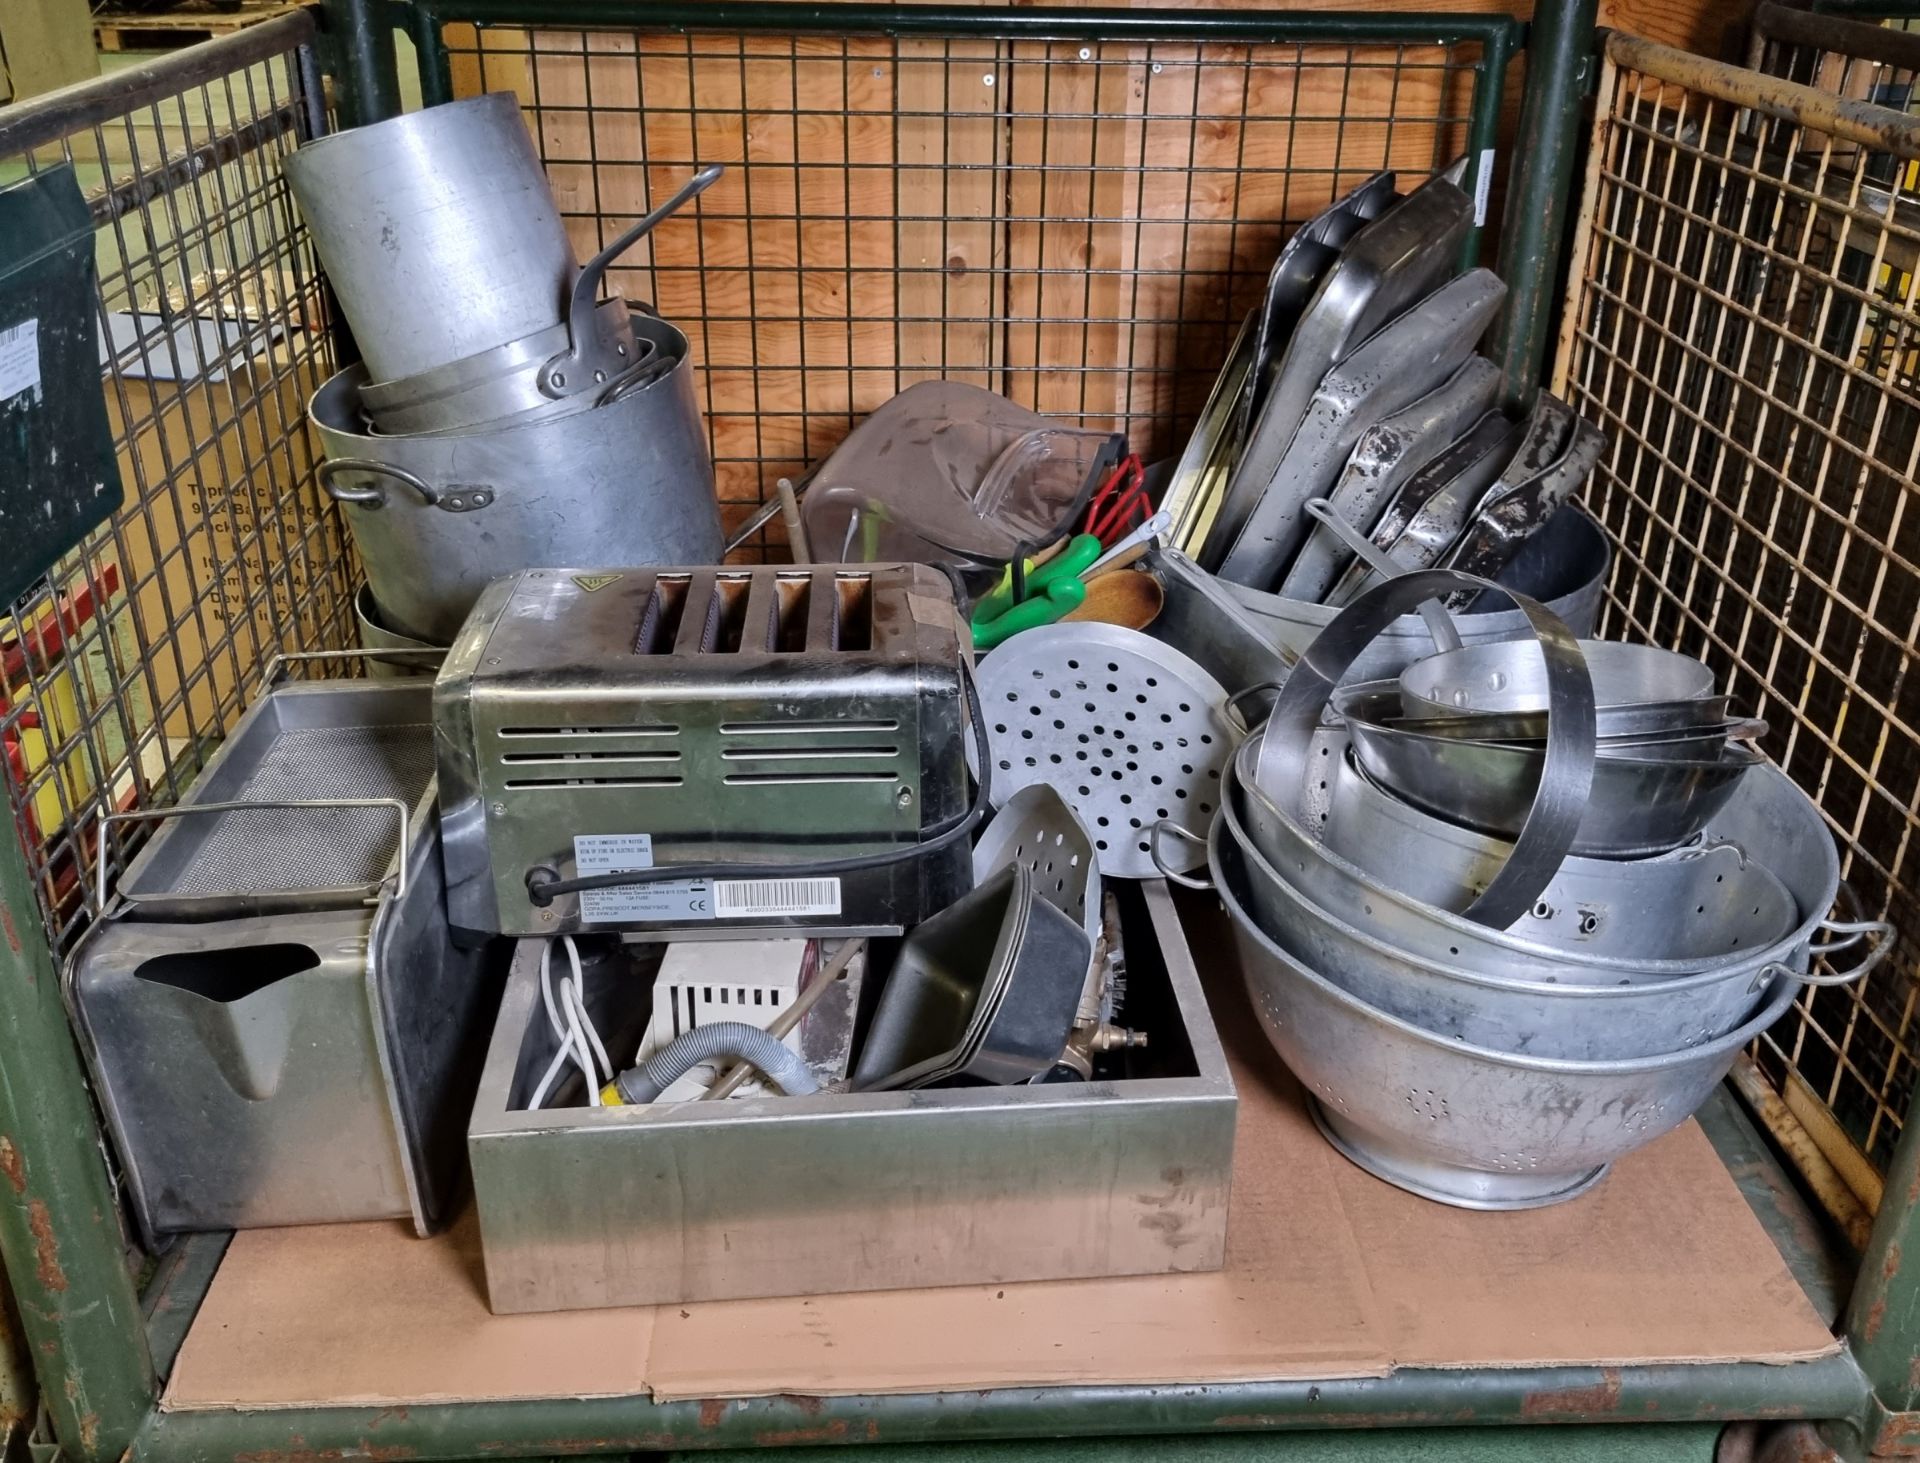 Catering equipment - pots, pans, trays, colanders, utensils, toaster